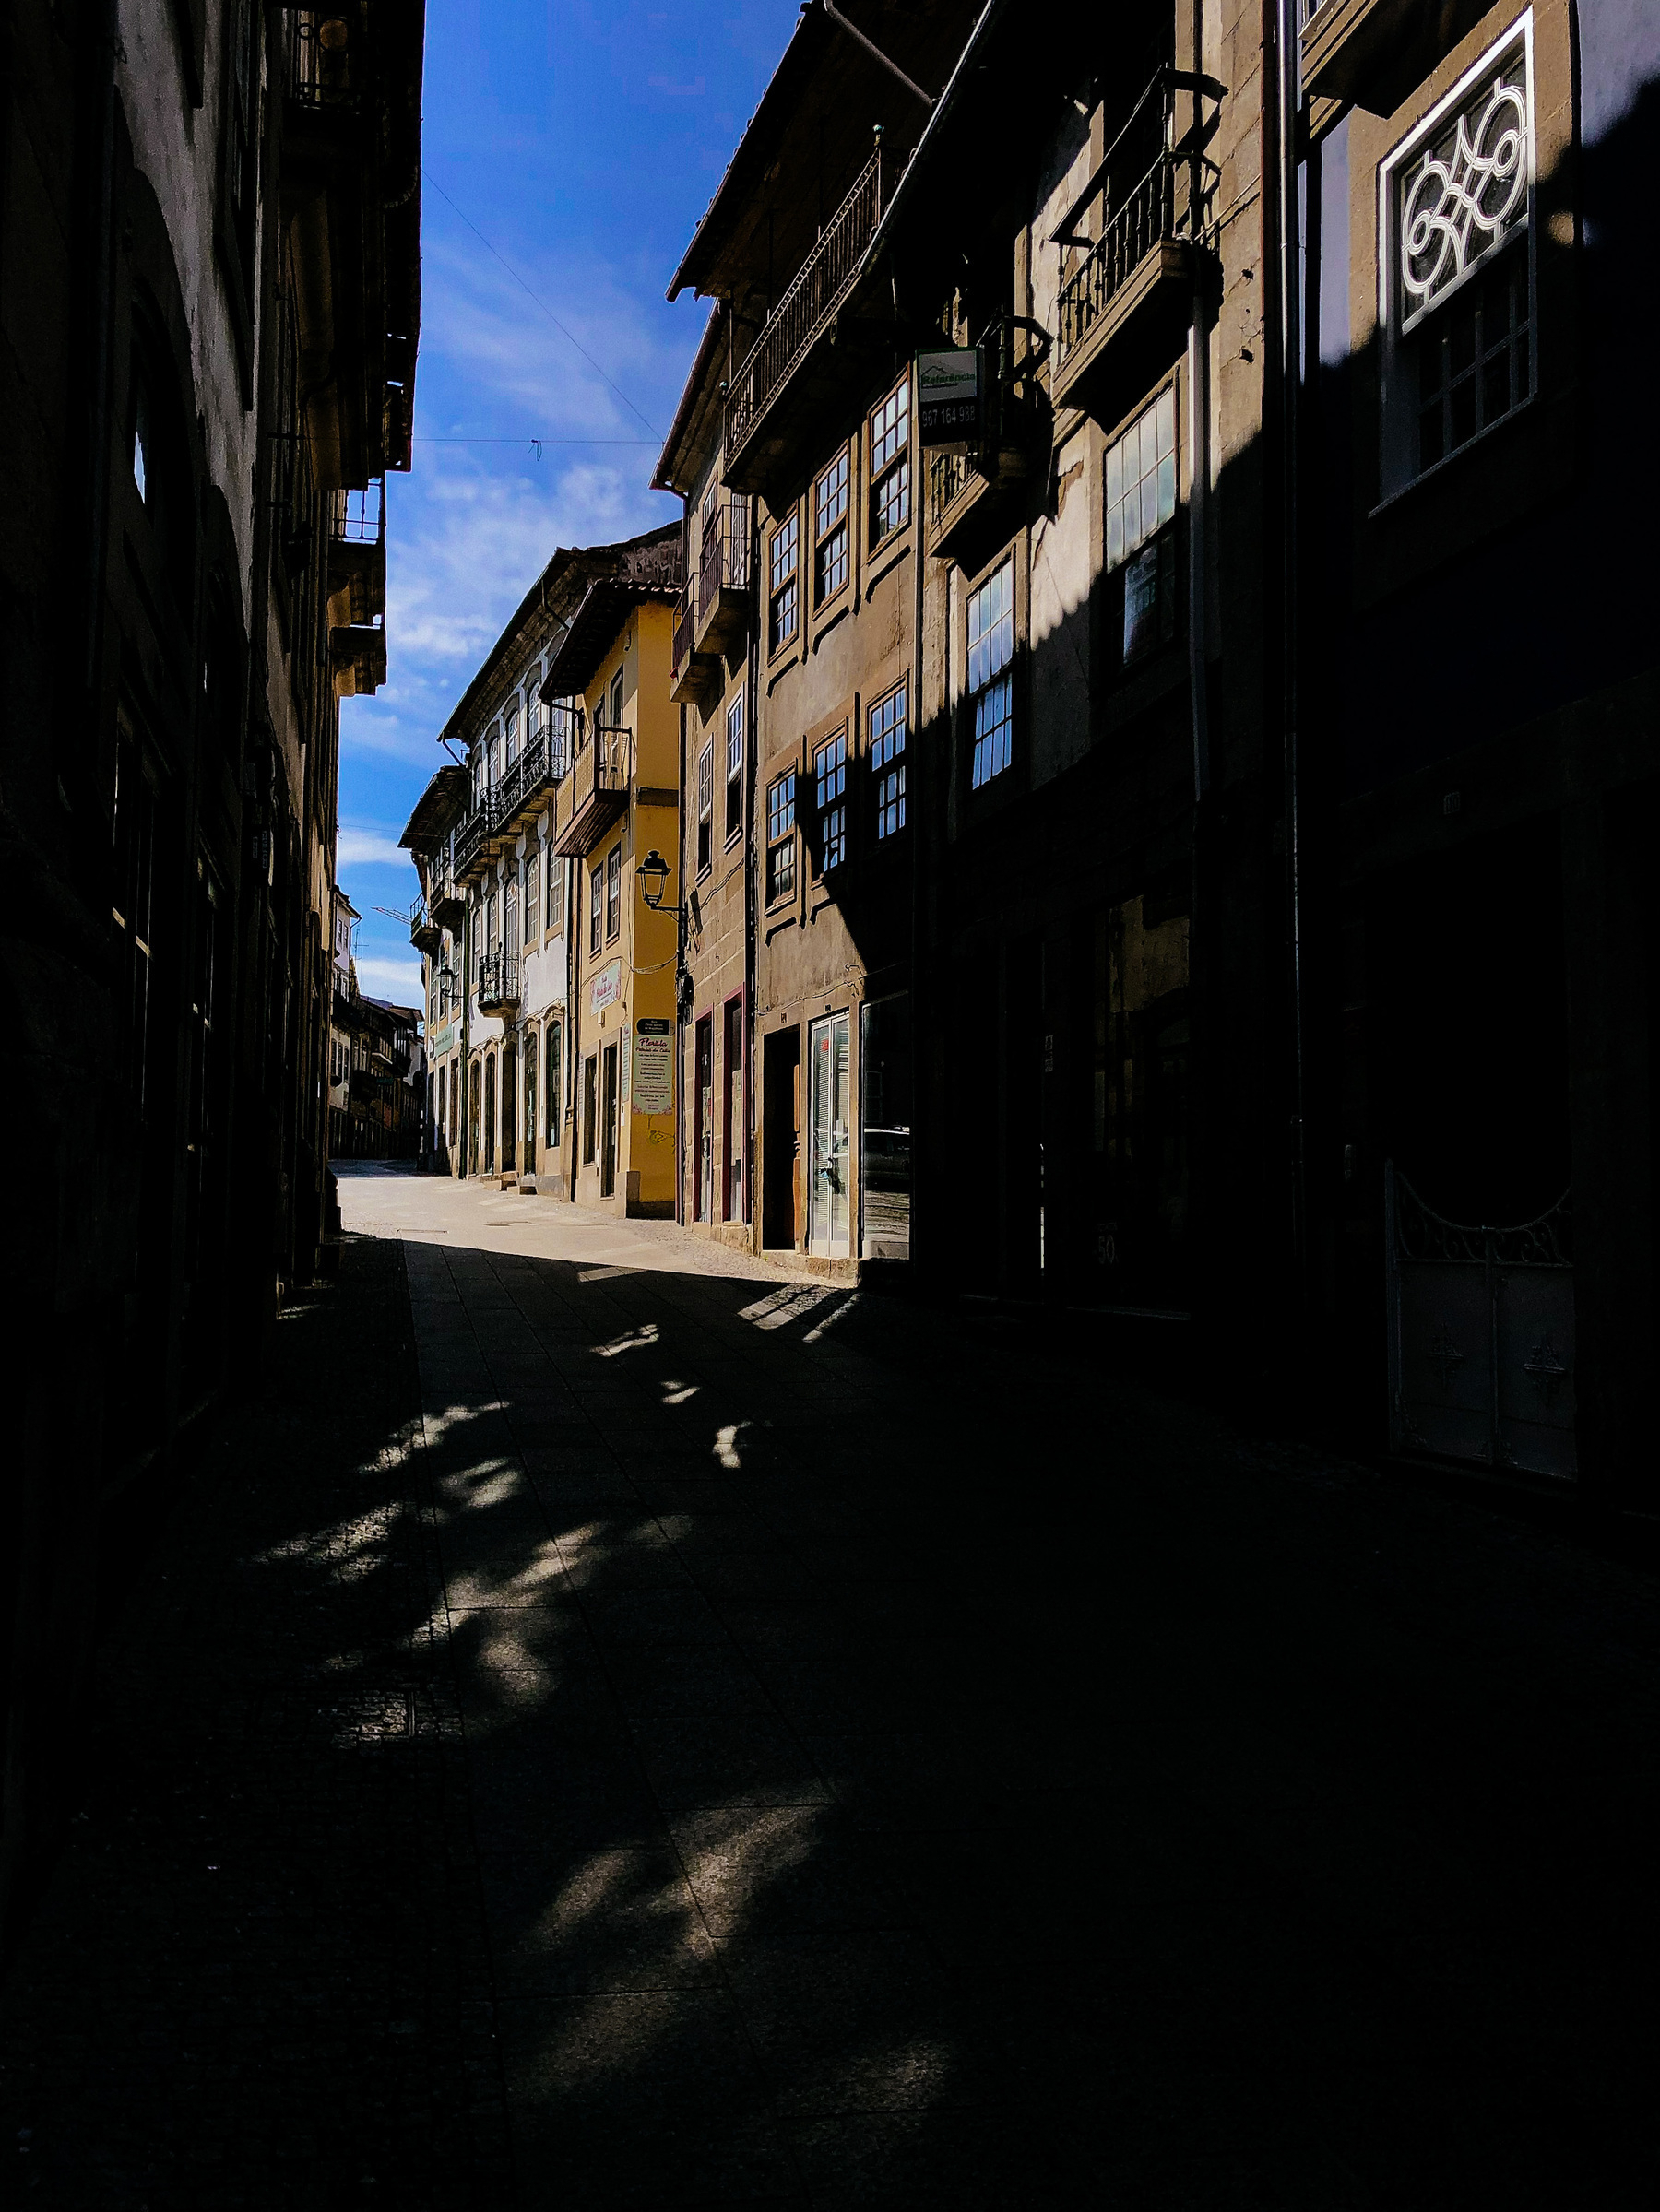 The city center, with old buildings. Dark street. 